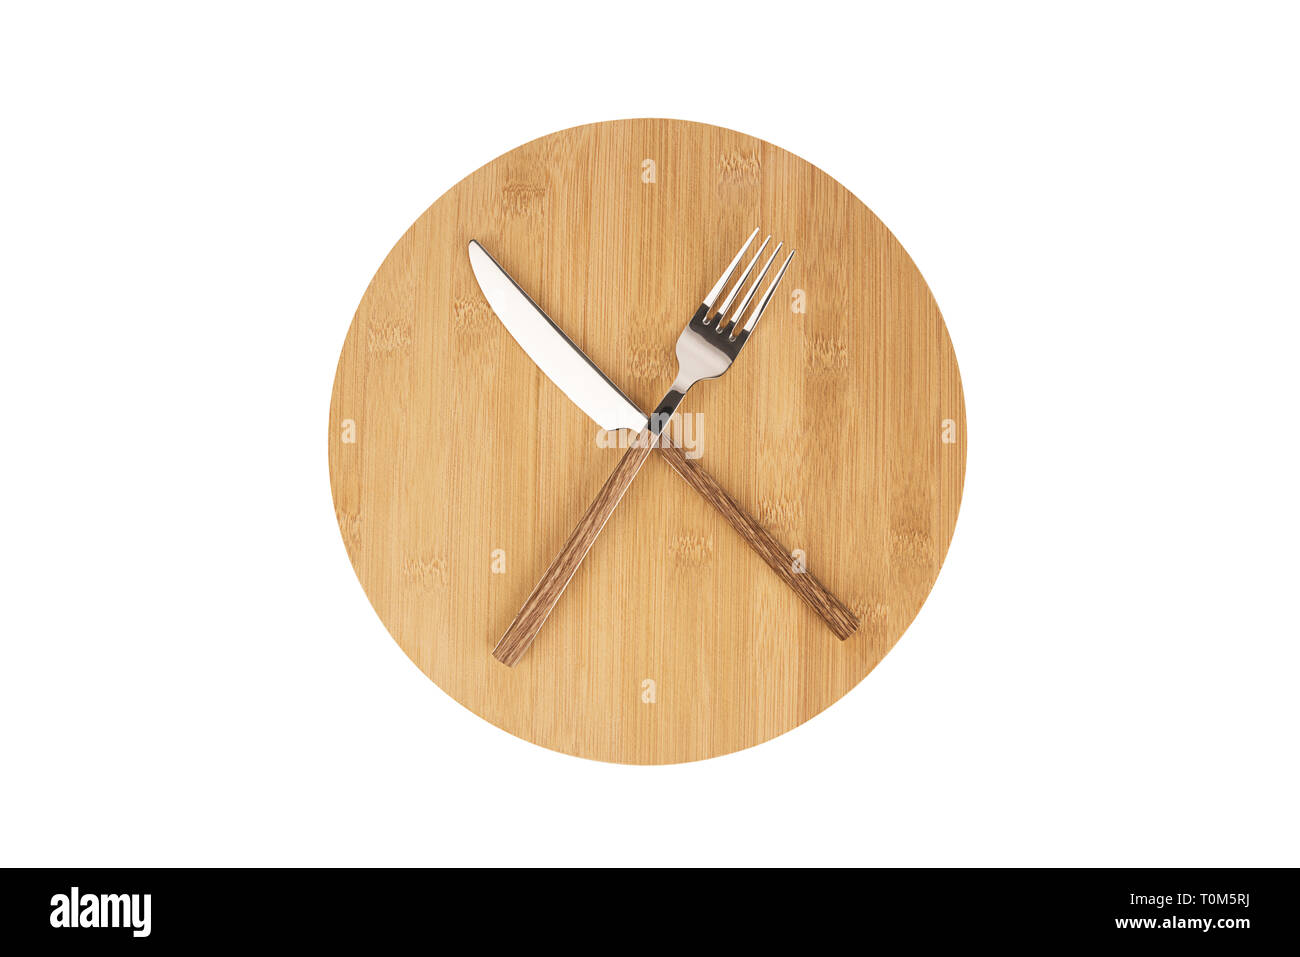 Fork and spoon disposed on a round wooden board. Intermittent fasting and diet concept. Stock Photo